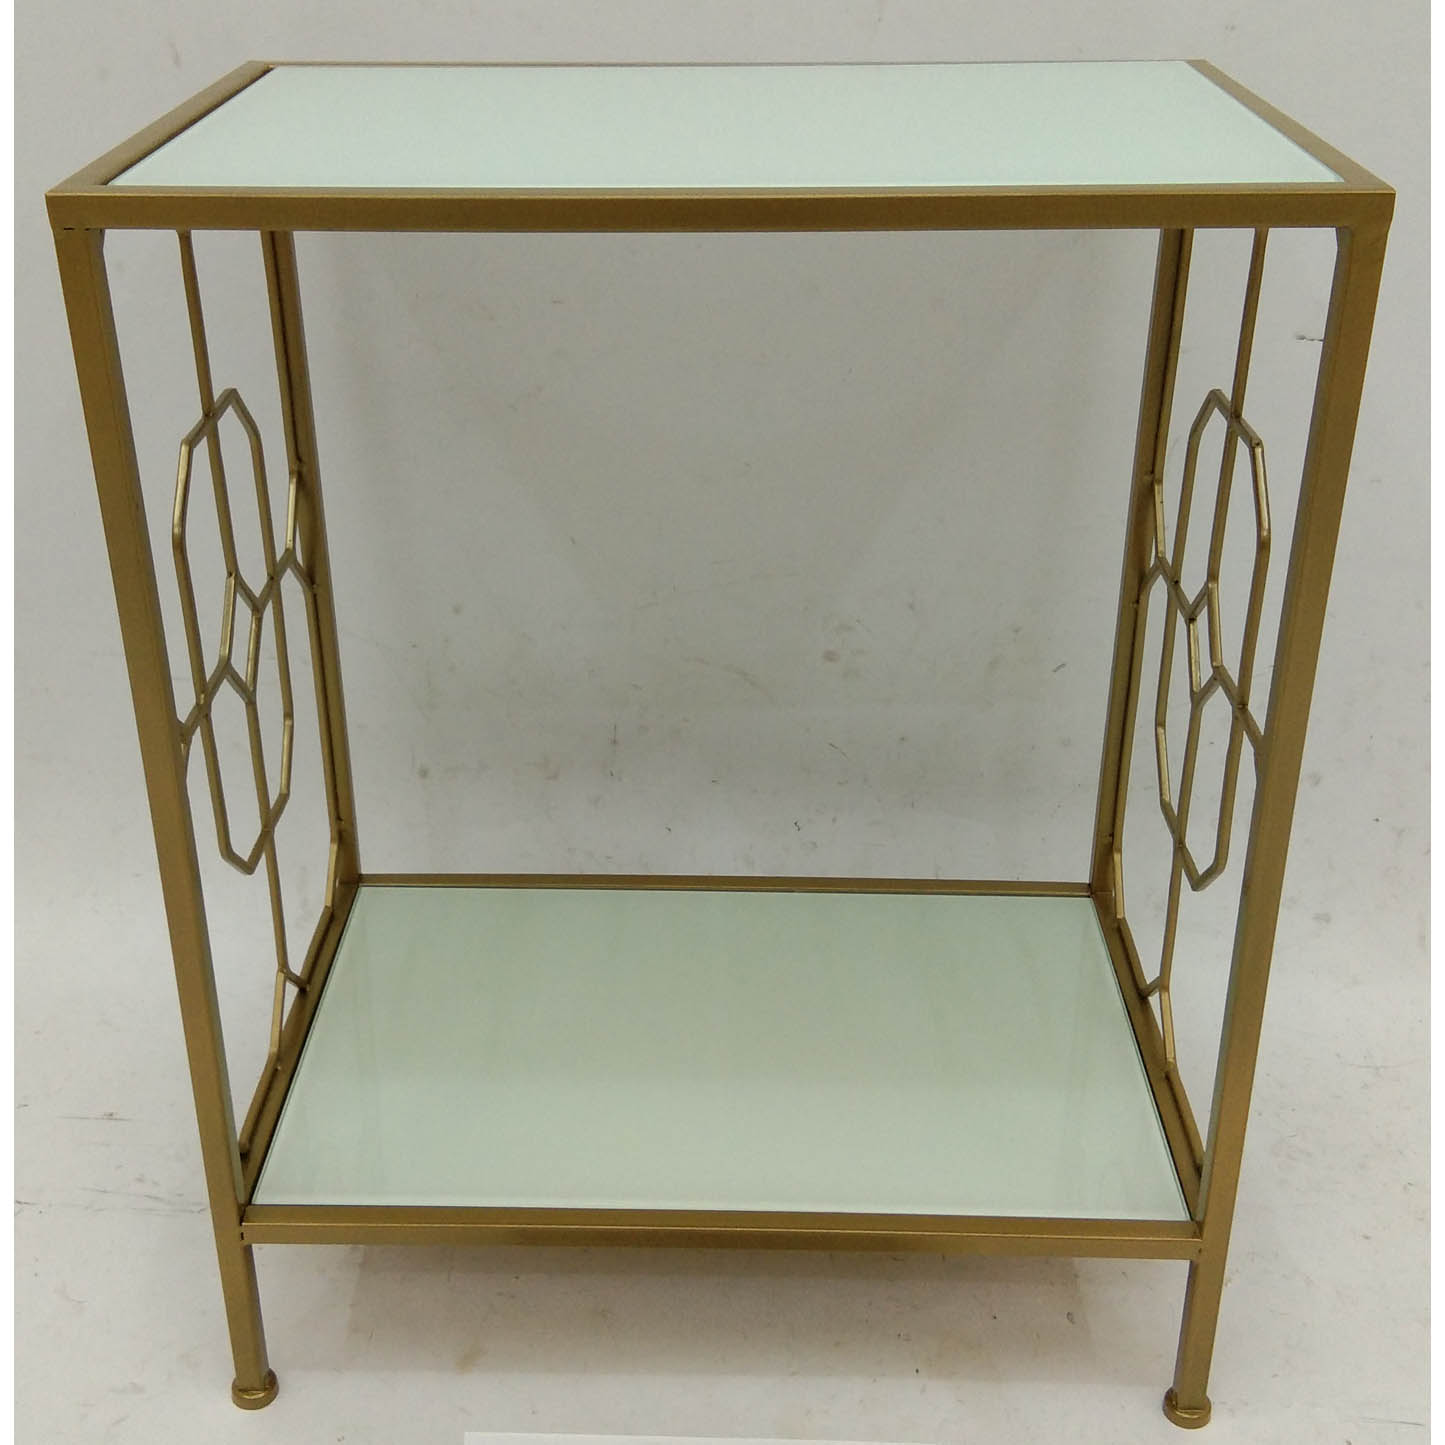 Gold rectangular metal side table with white glass tier & top and geometric metal side decor